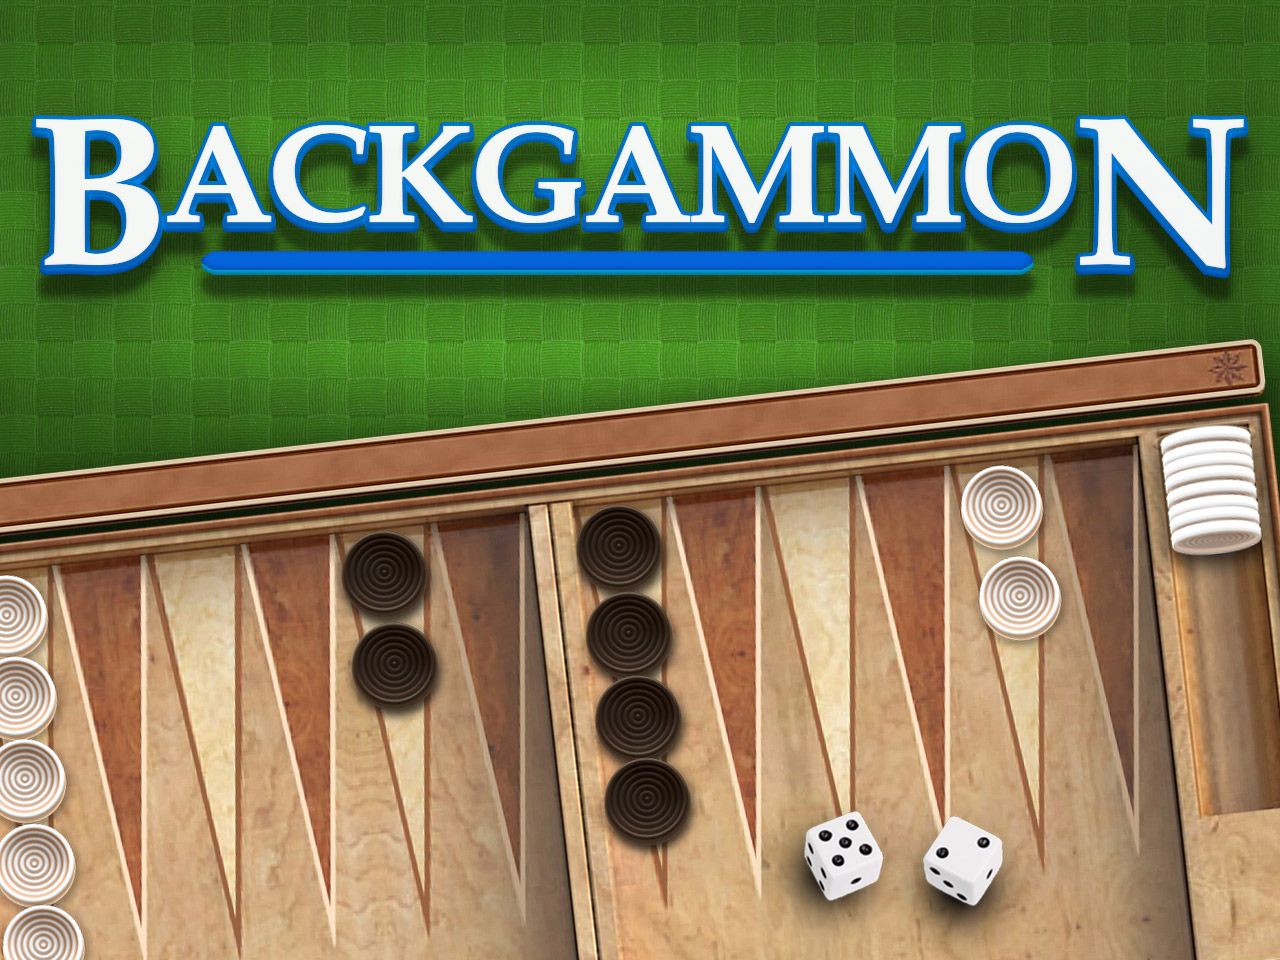 AOL Backgammon Review and Test - Backgammon Rules